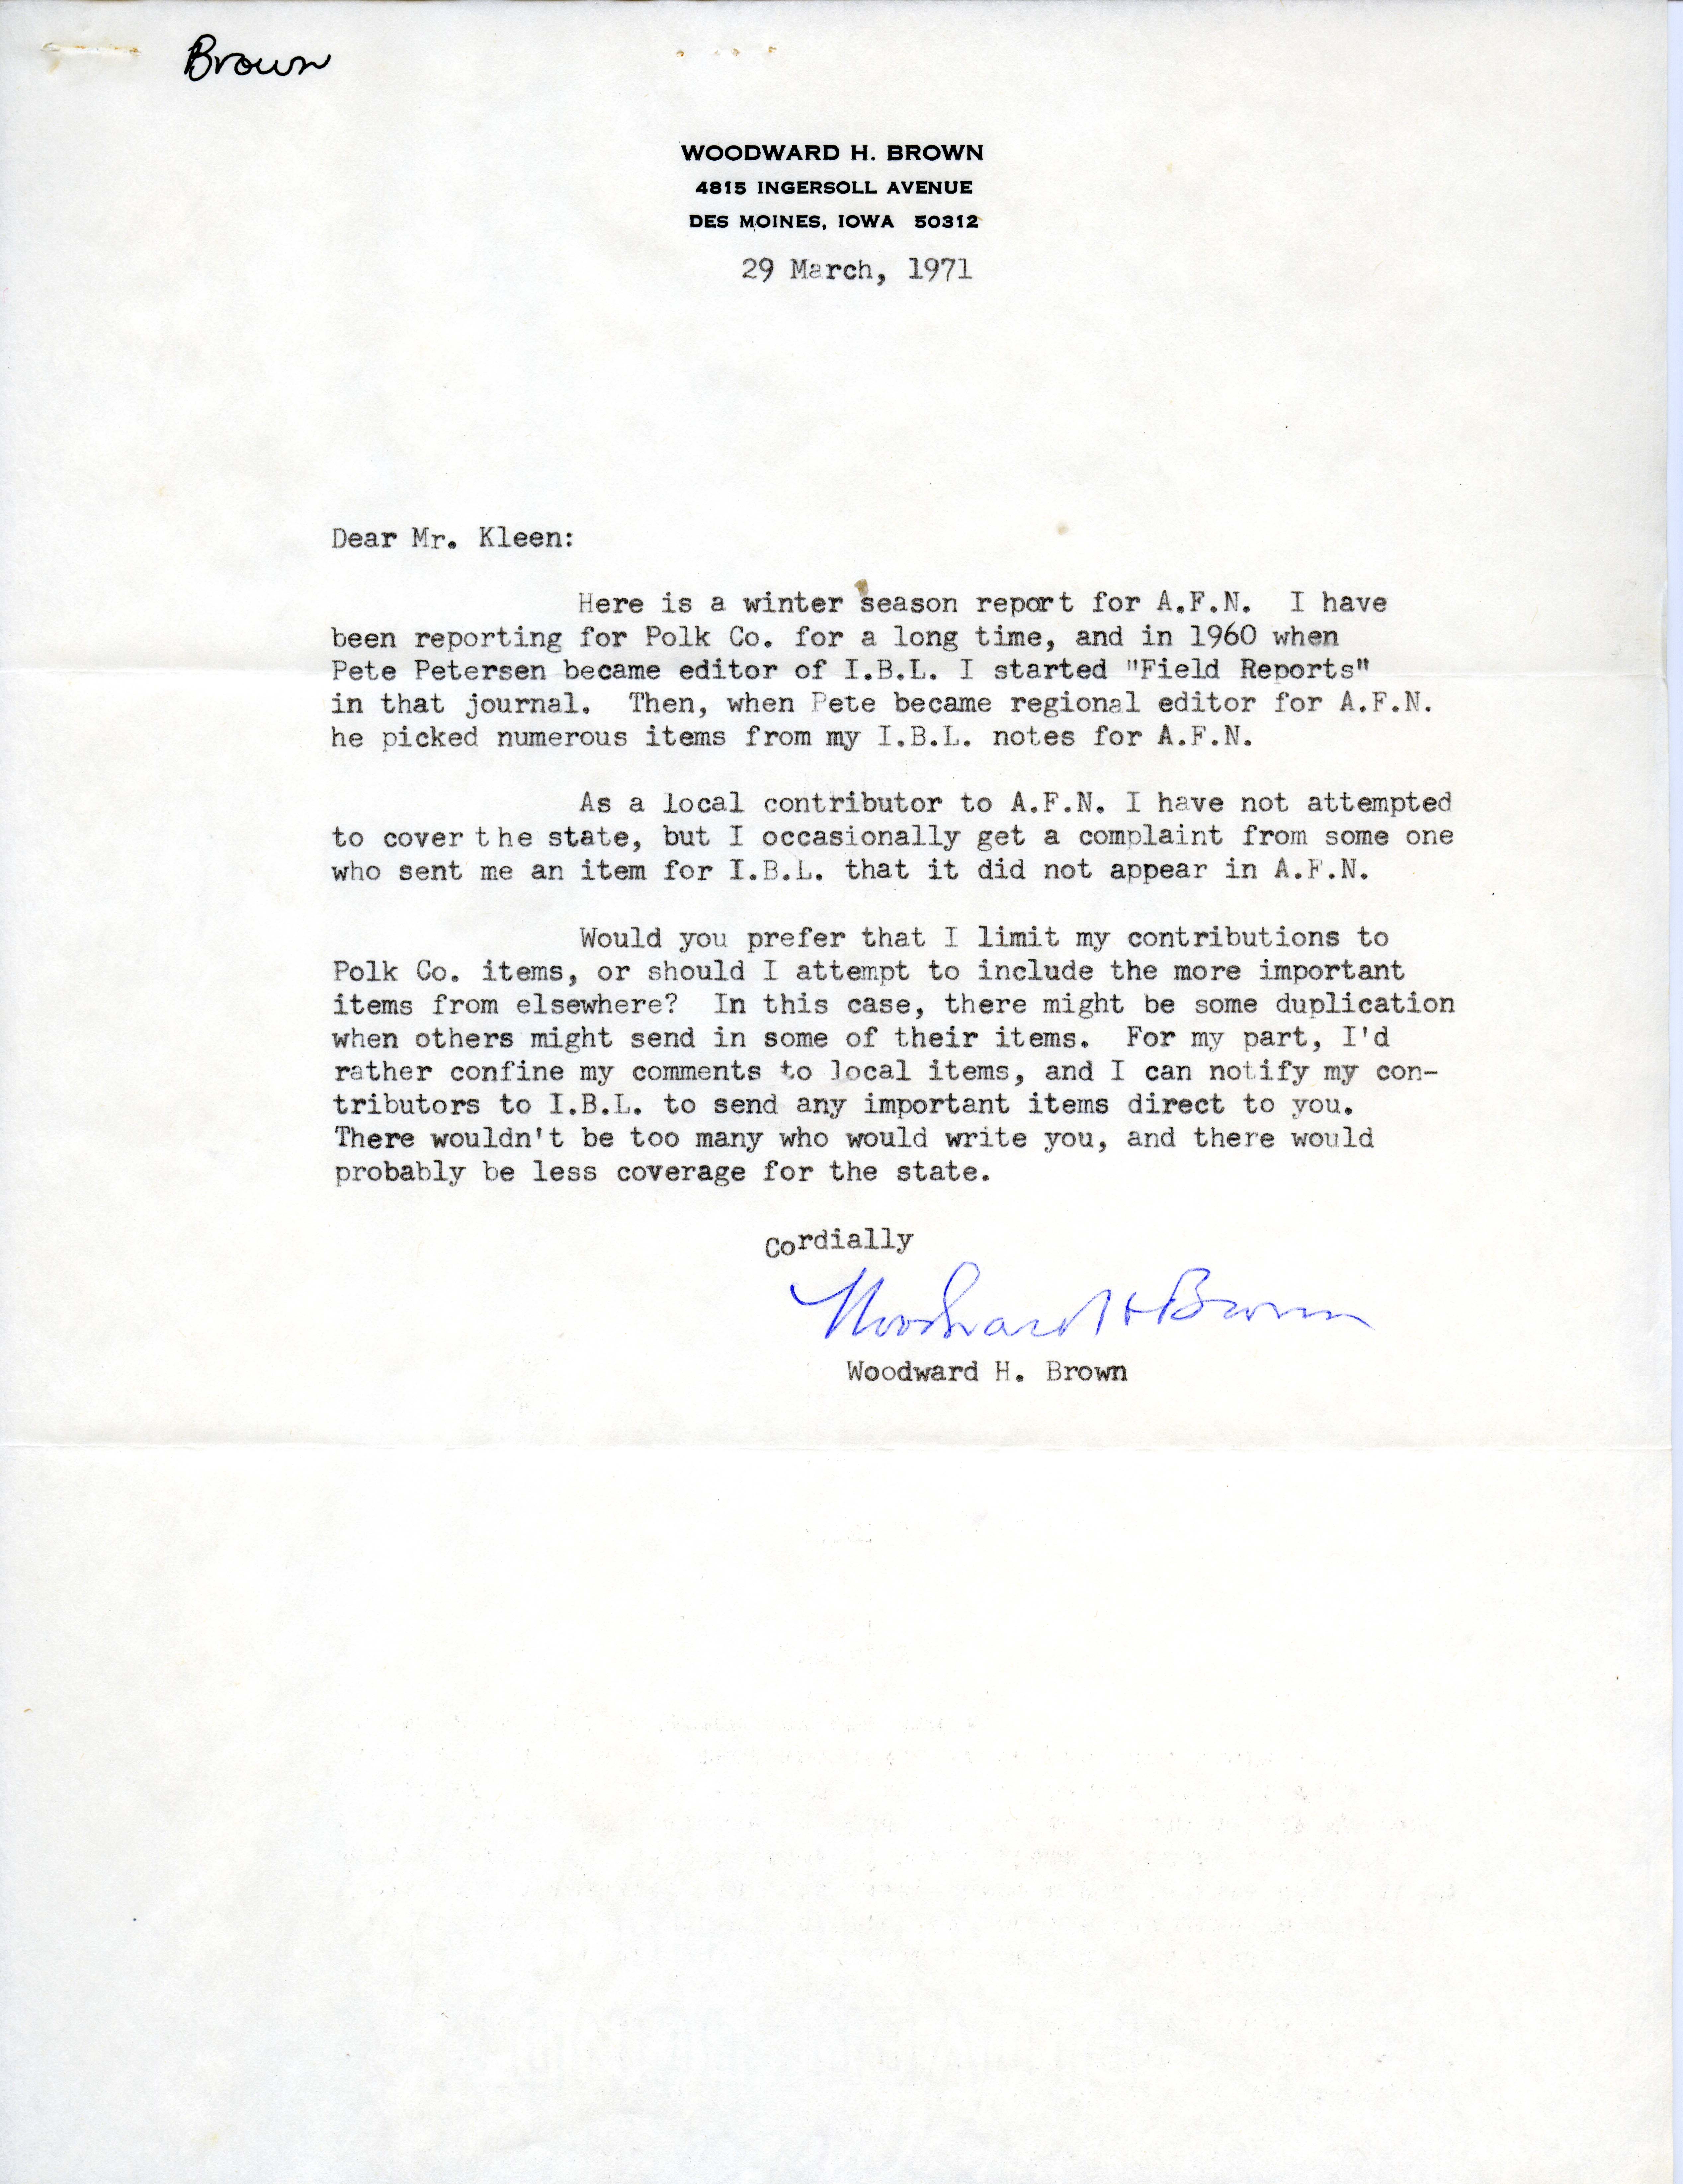 Audubon field notes, winter 1970-1971, and Woodward H. Brown letter to Vernon M. Kleen regarding reporting practices, March 29, 1971